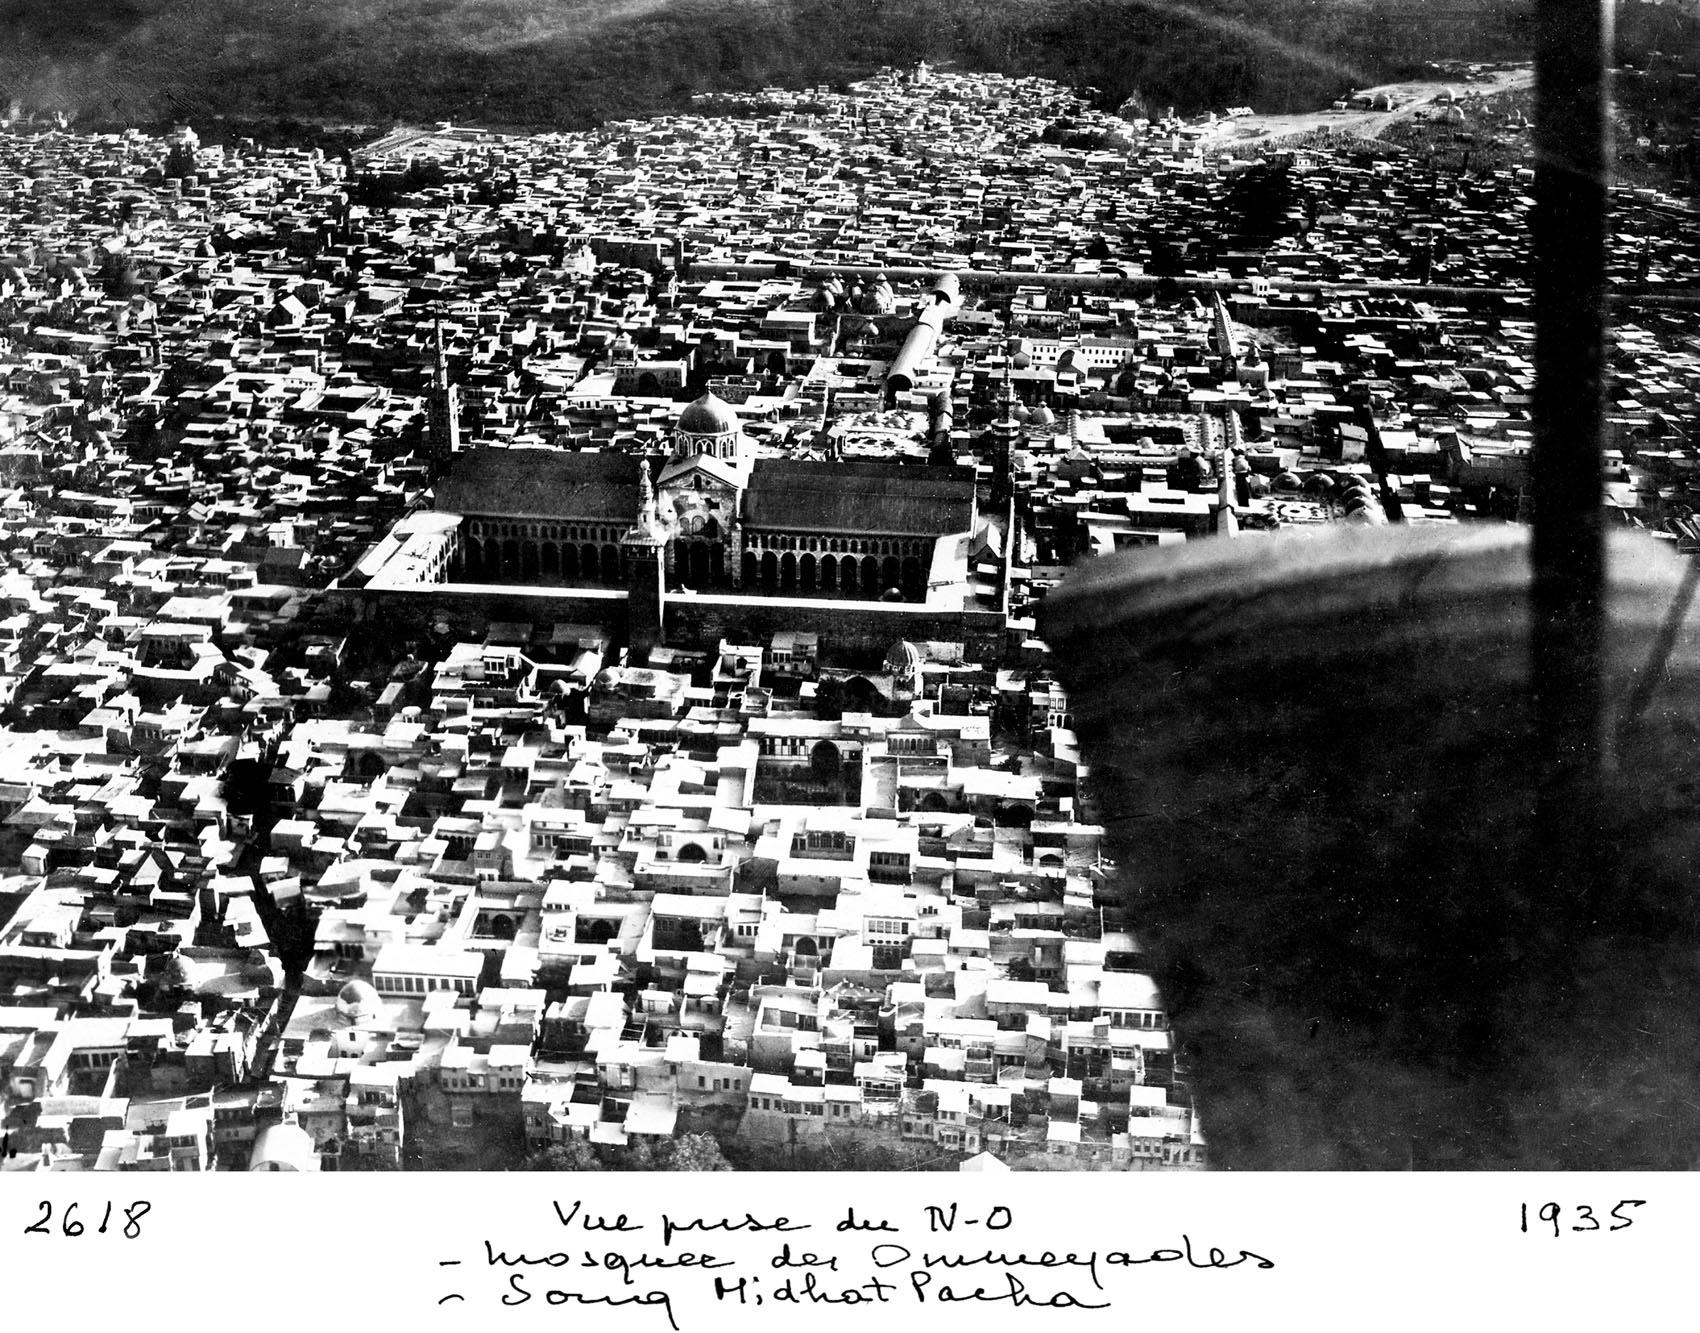 Aerial view from the northwest toward the Umayyad Mosque and Suq Midhat Pasha